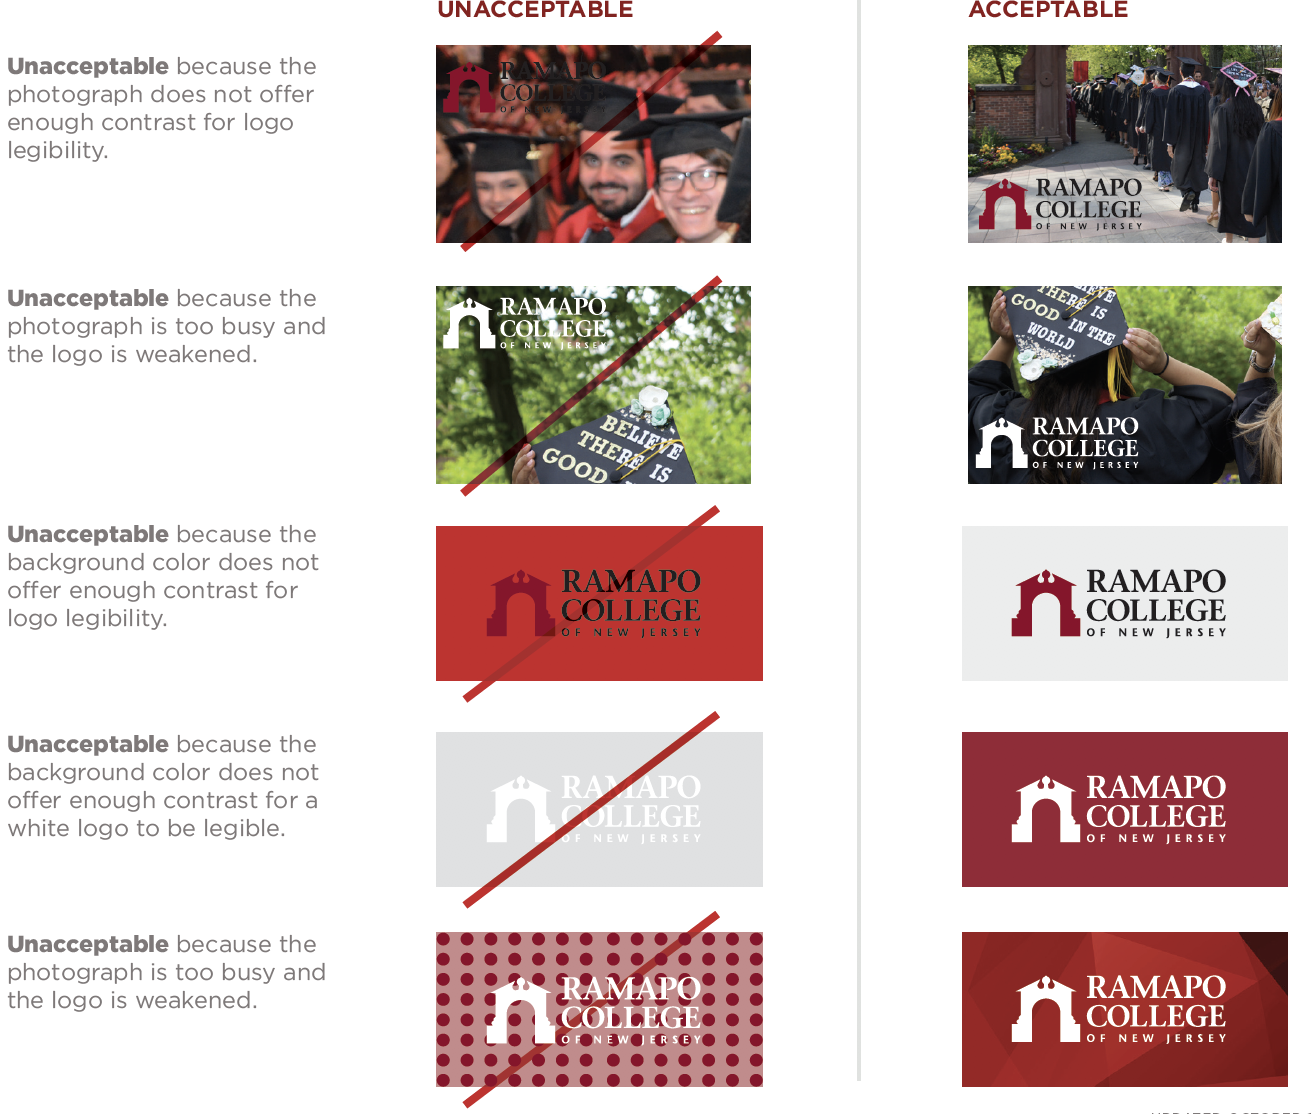 Ramapo logo on backgrounds that work and that do not work.